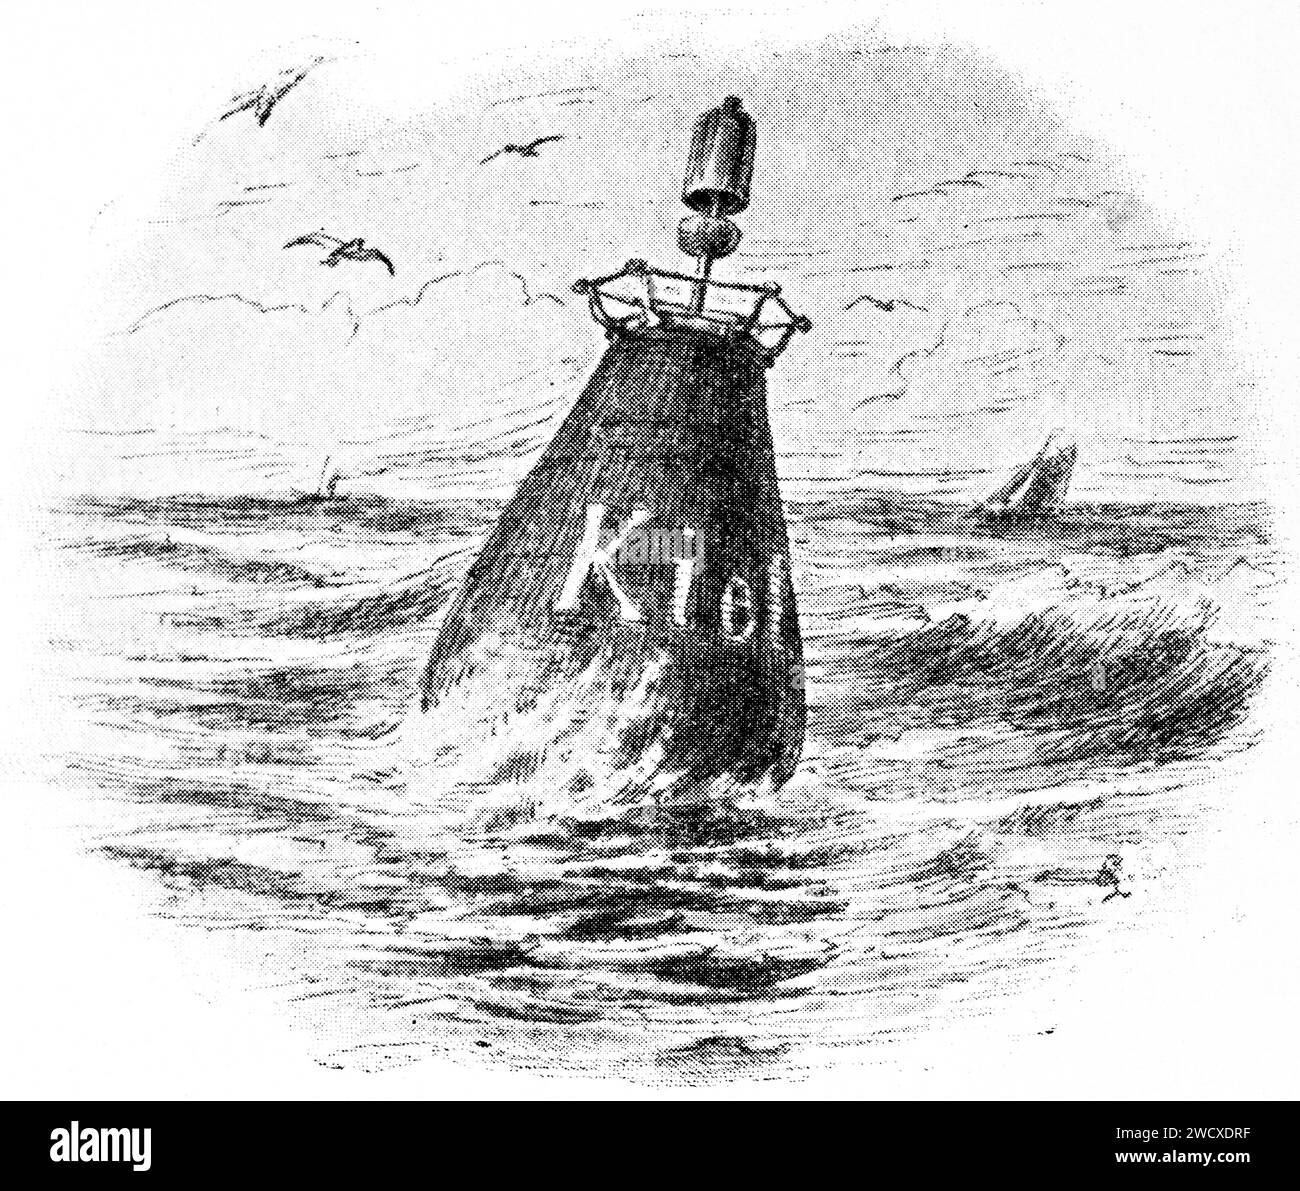 Buoy named Kiel with top light on the open sea, presumably Baltic Sea, Schleswig-Holstein, Northern Germany, historical illustration 1898 Stock Photo